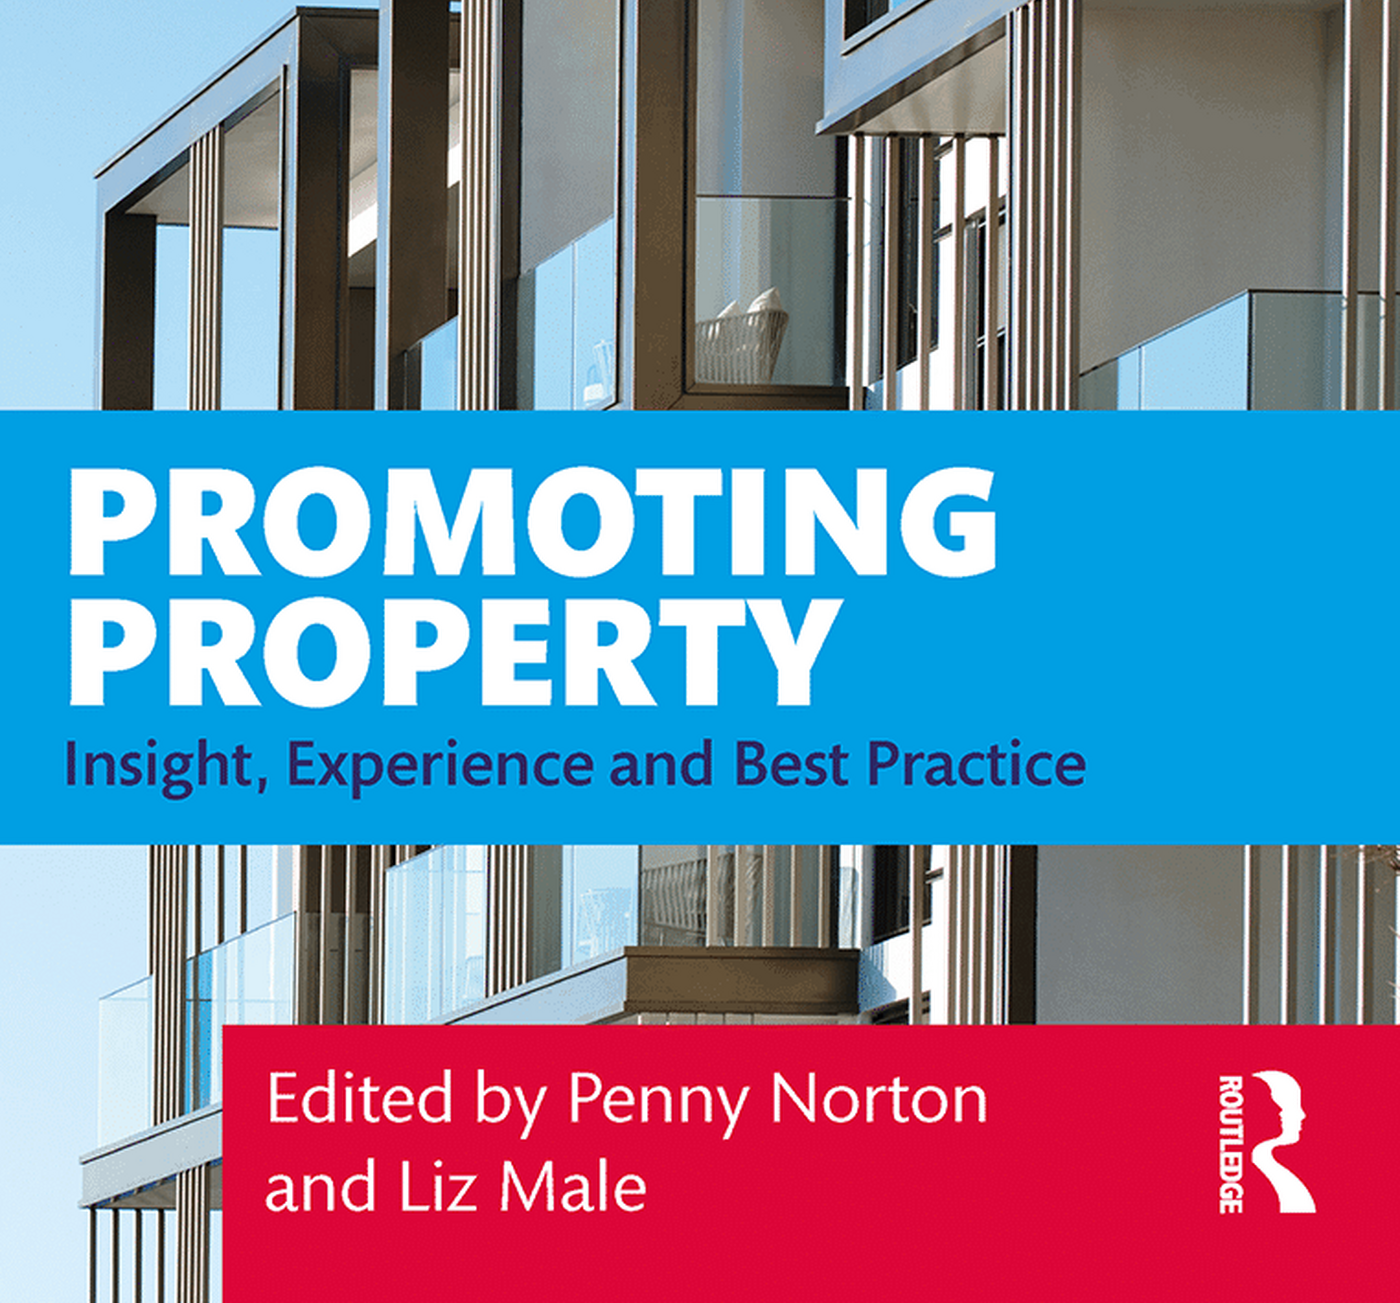 LMC Promoting Property book front cover